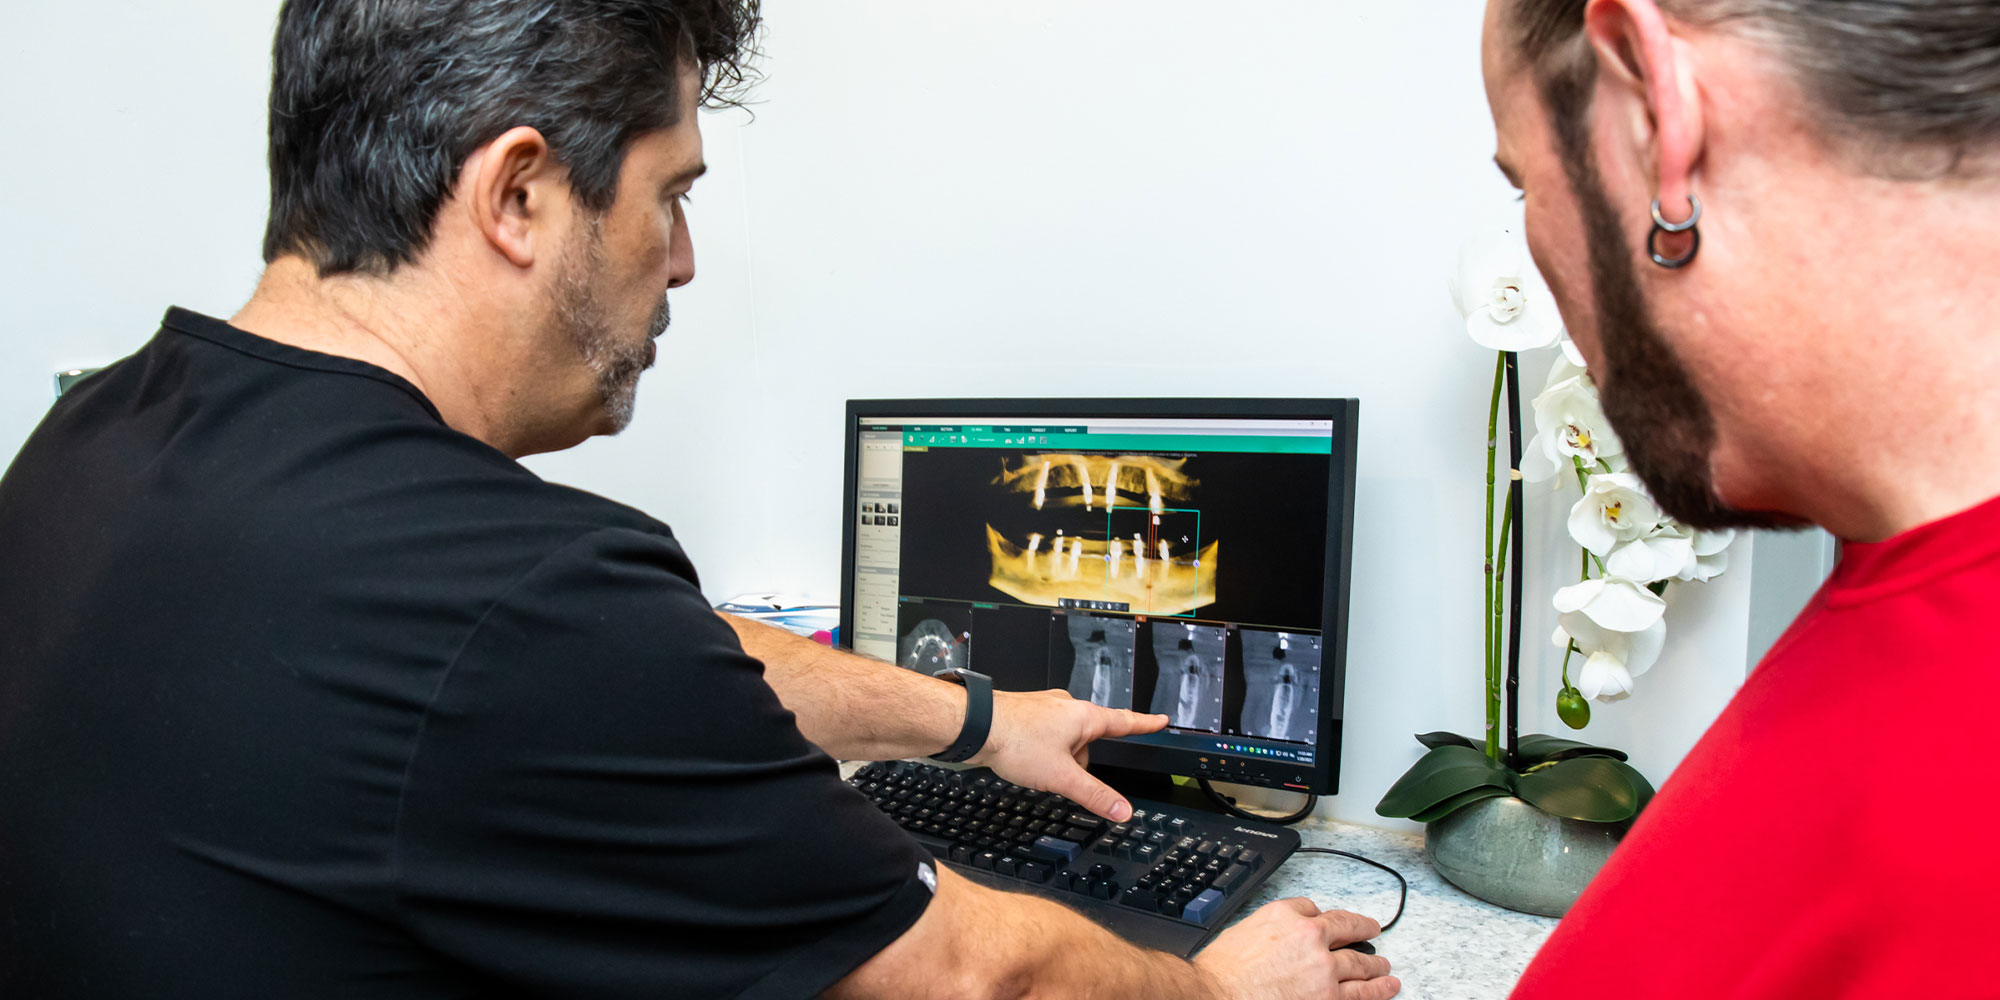 Doctor and patient discussing imaging display of dental implant procedure